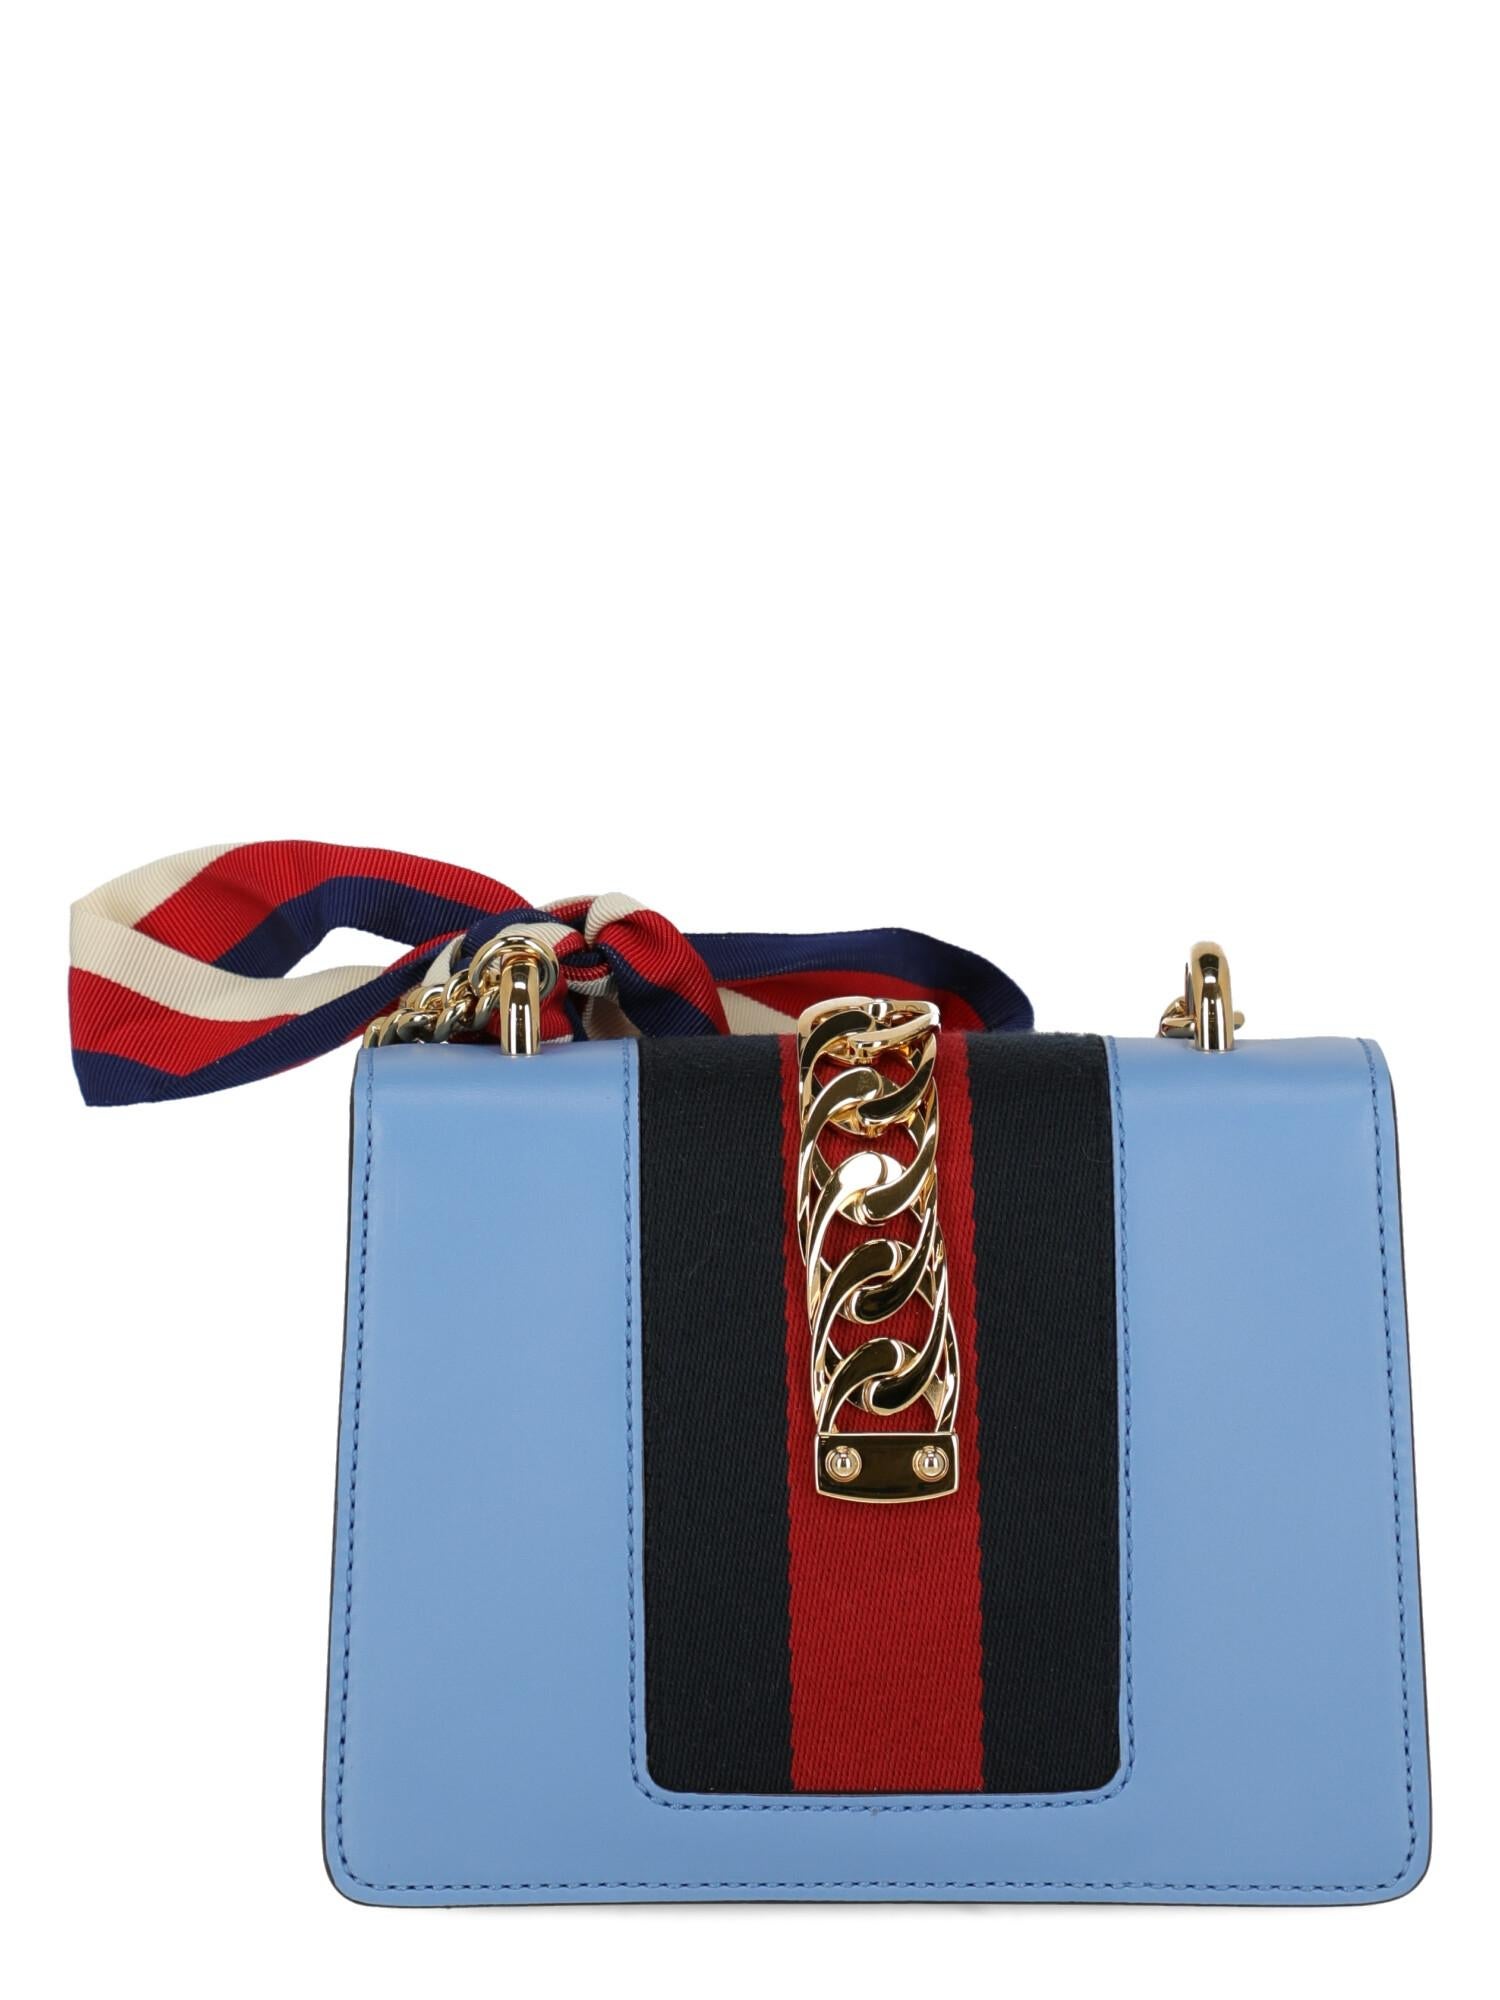 Gucci Woman Shoulder bag Sylvie Blue Leather In Excellent Condition For Sale In Milan, IT